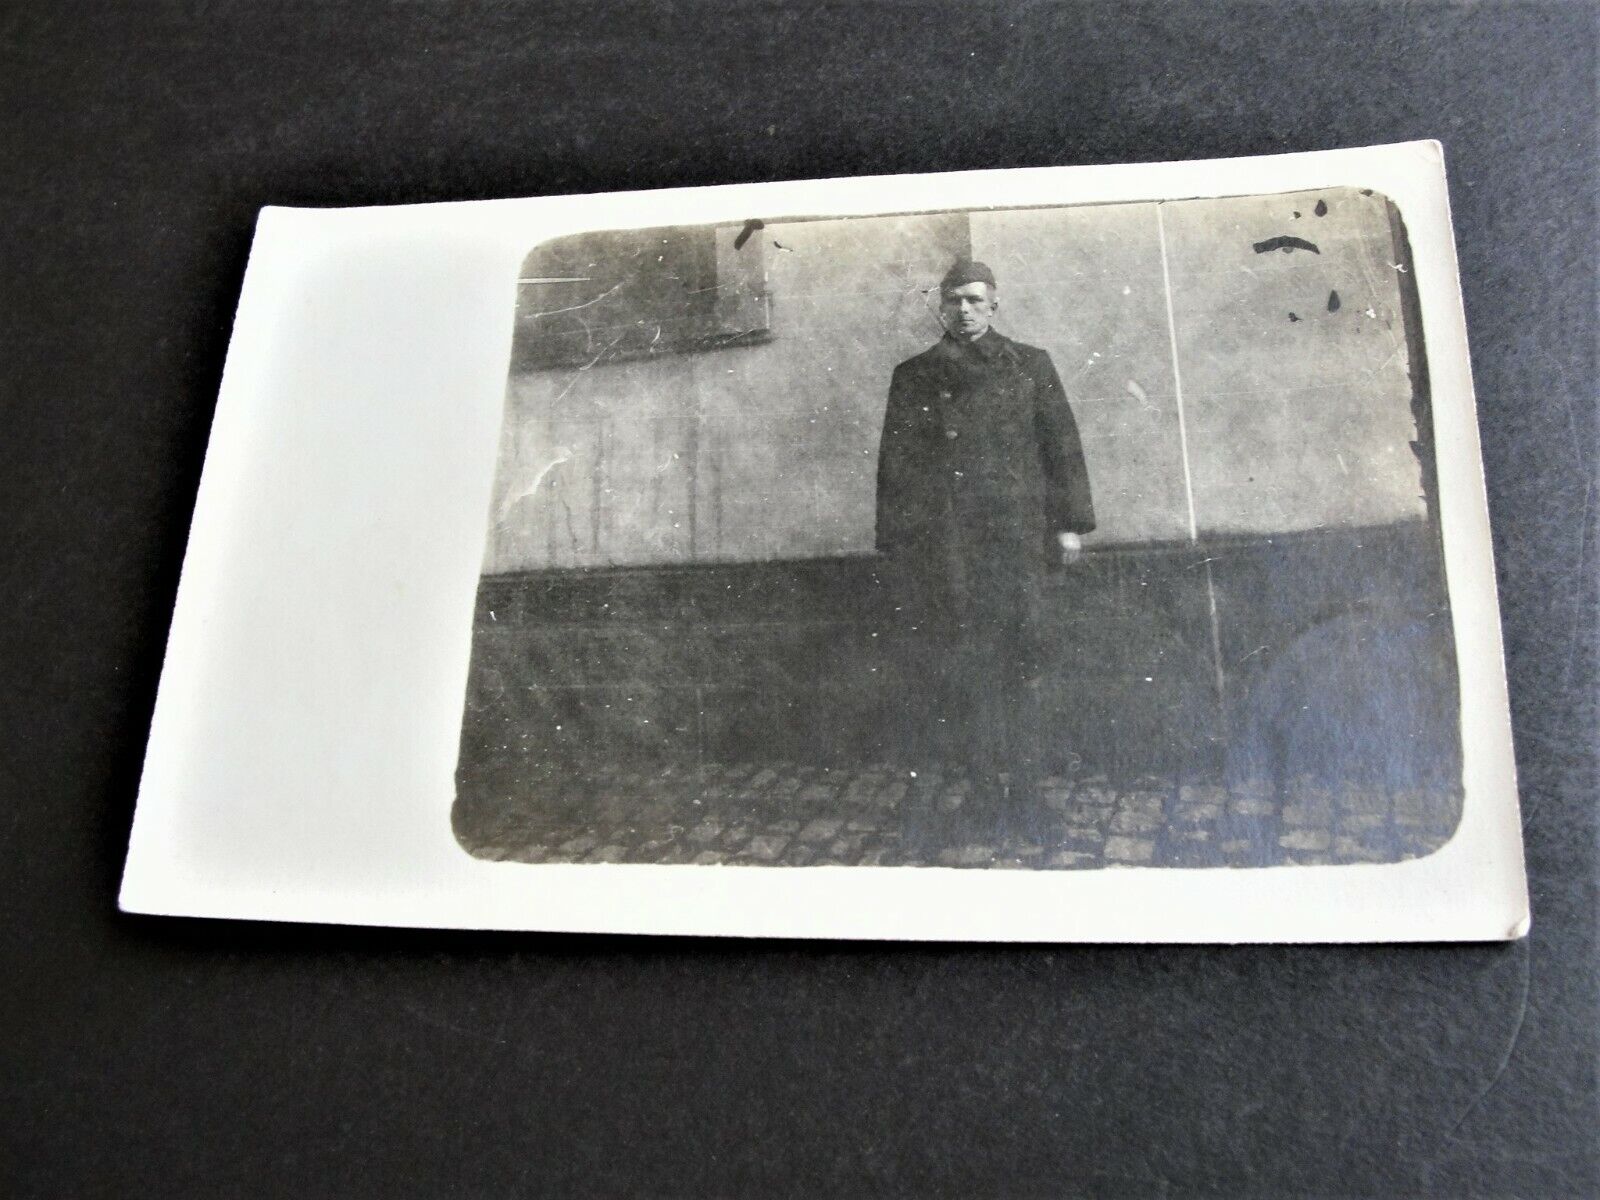 WWI Germany Soldier dated February 21, 1919- Real Photo Postcard.